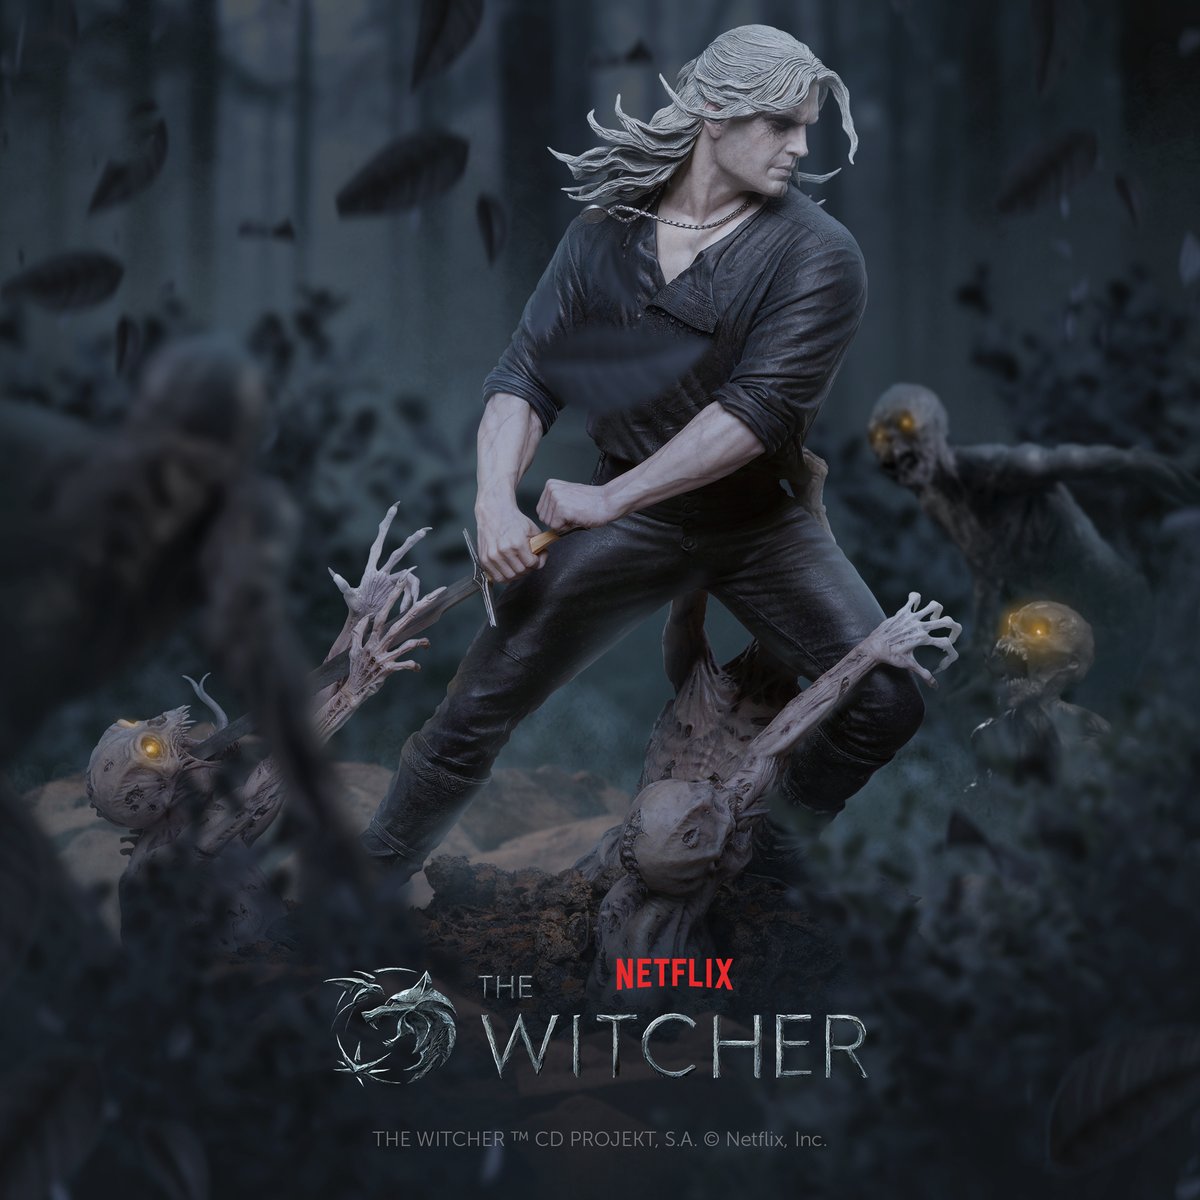 Watching season 3 of #witchernetflix side by side with our 1:4 Geralt of Rivia statue 🐺😎

wetanz.com/brands/the-wit…

#Witcher3 #Collectibles